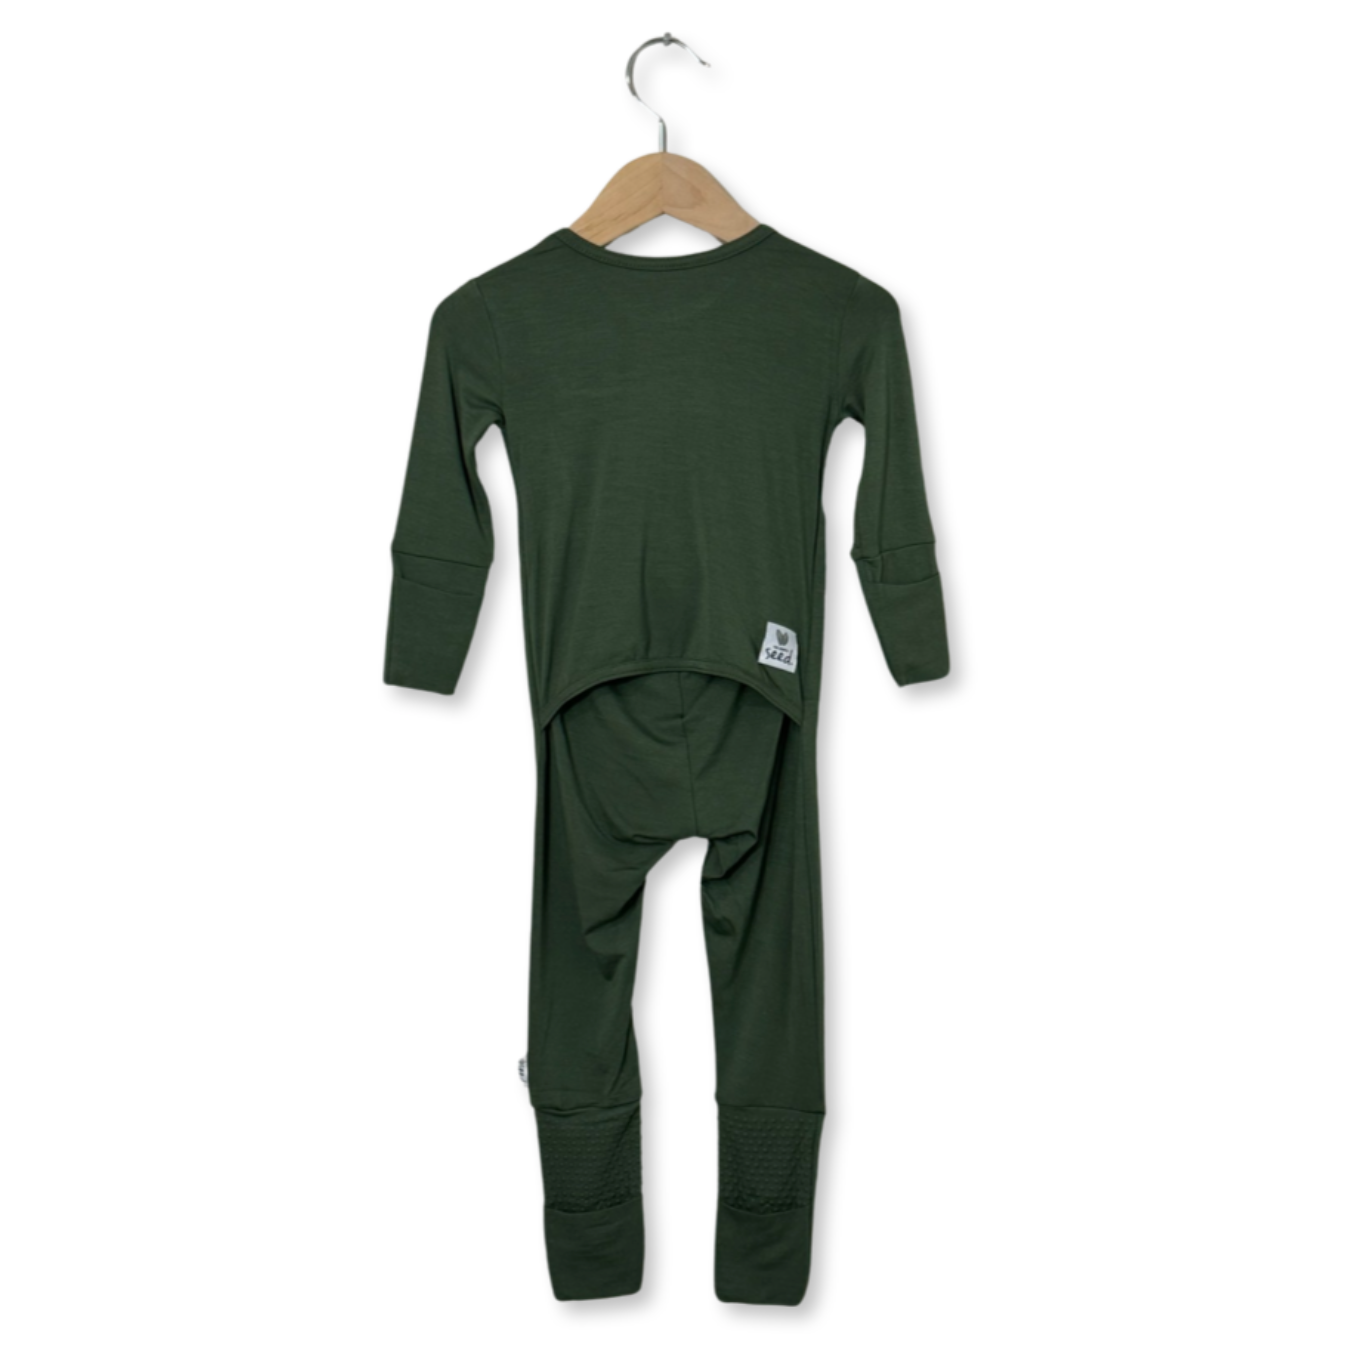 Forest Adaptive Tube Access with snaps Kid's Day to Night Romper